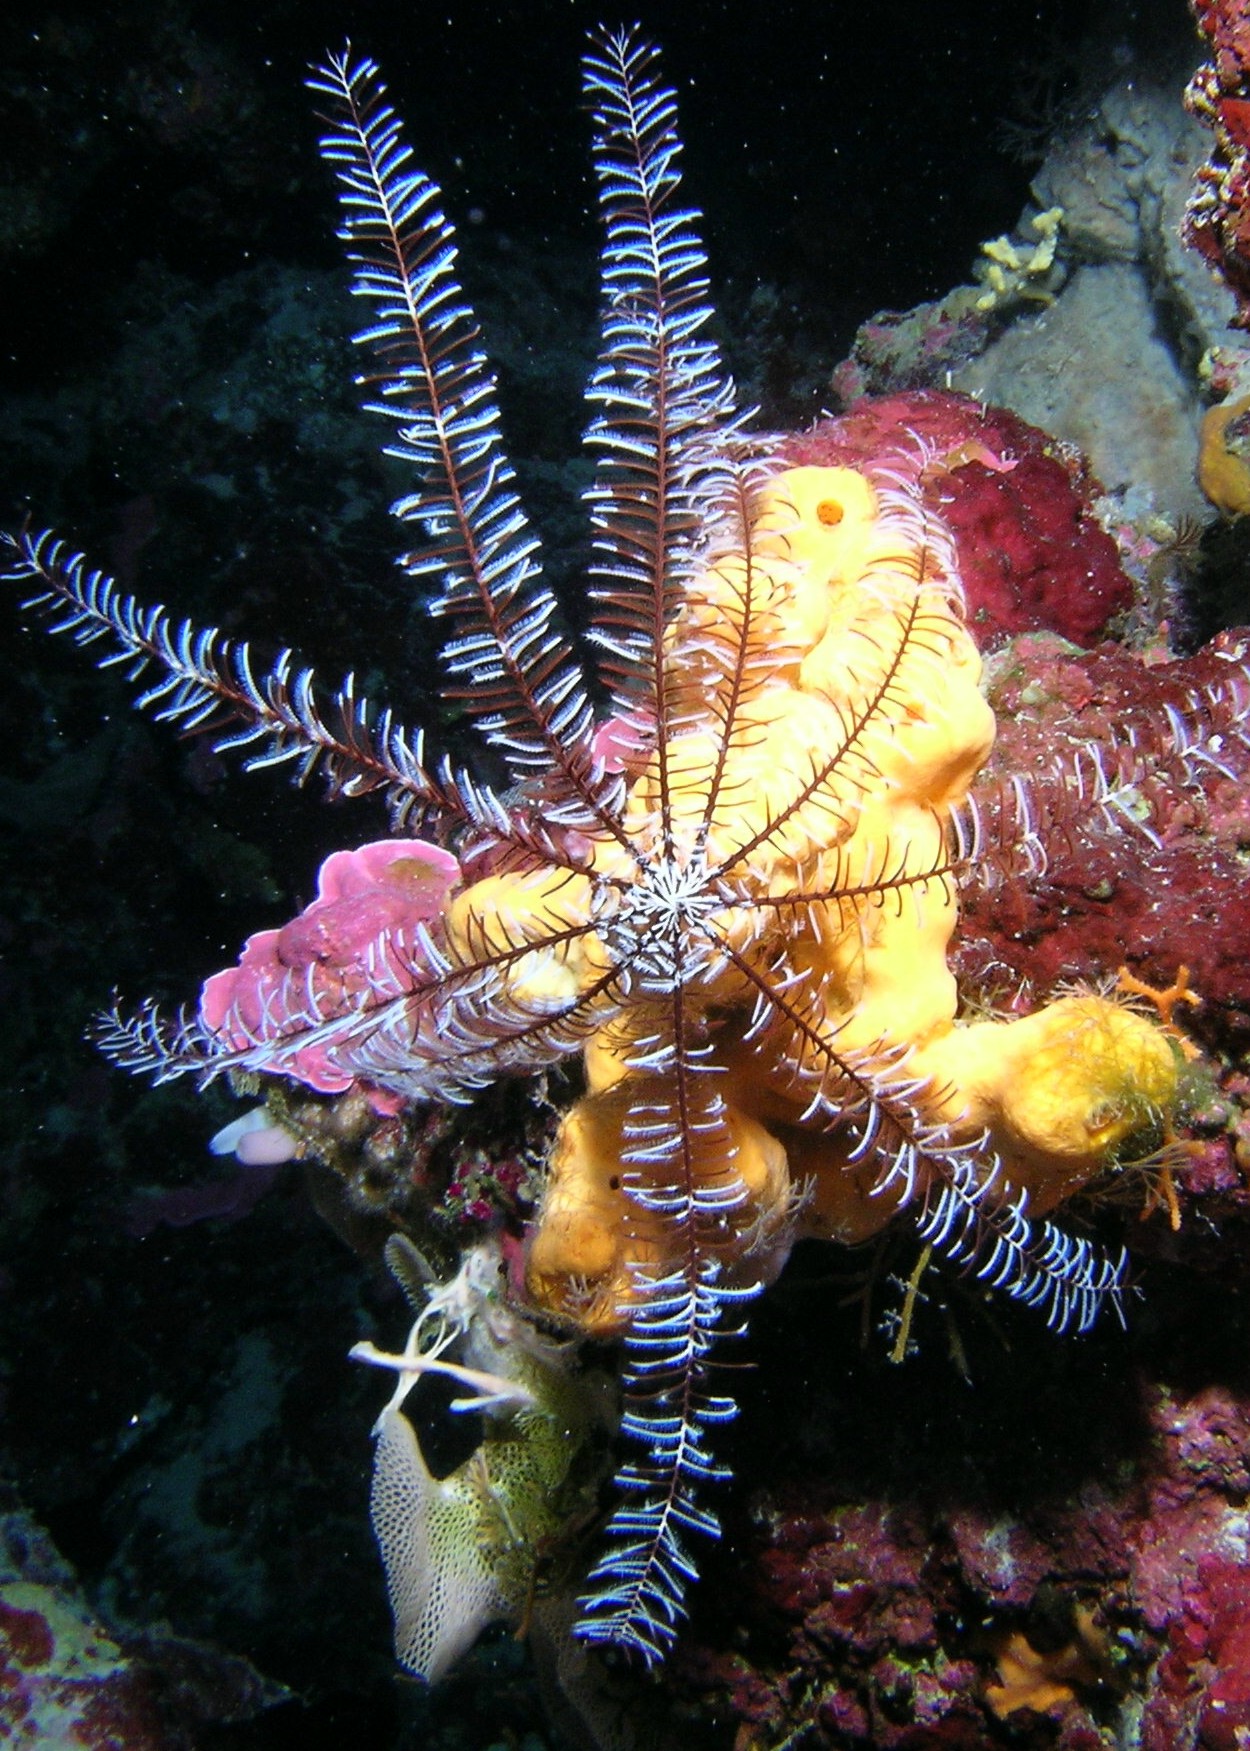 Feather star.